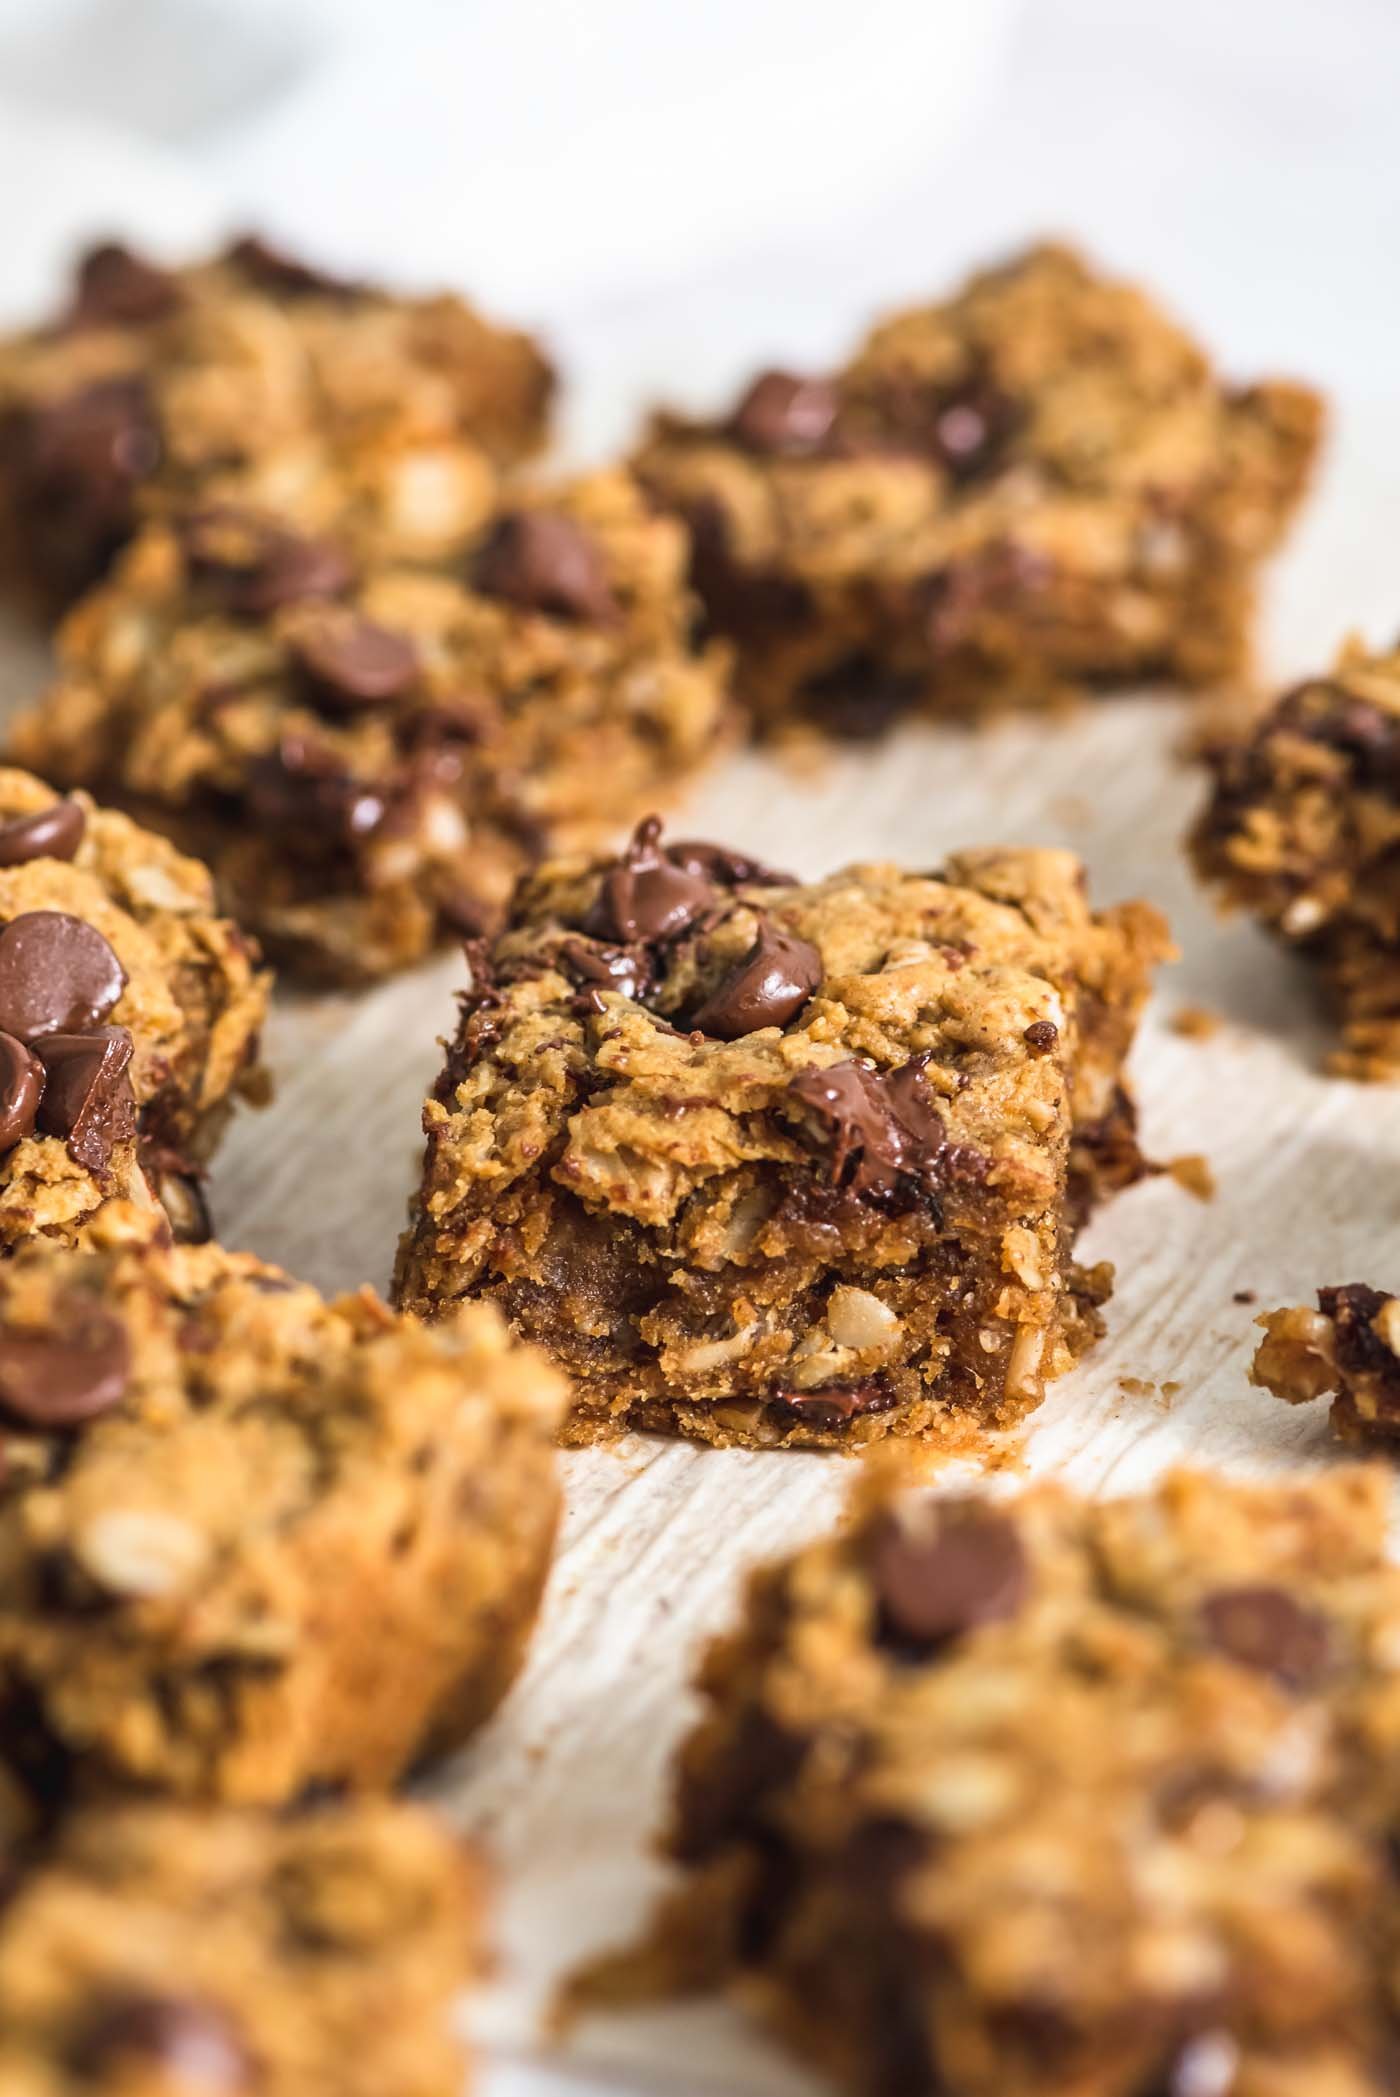 A number of peanut butter banana oatmeal chocolate chip cookie bars on a piece of parchment paper.